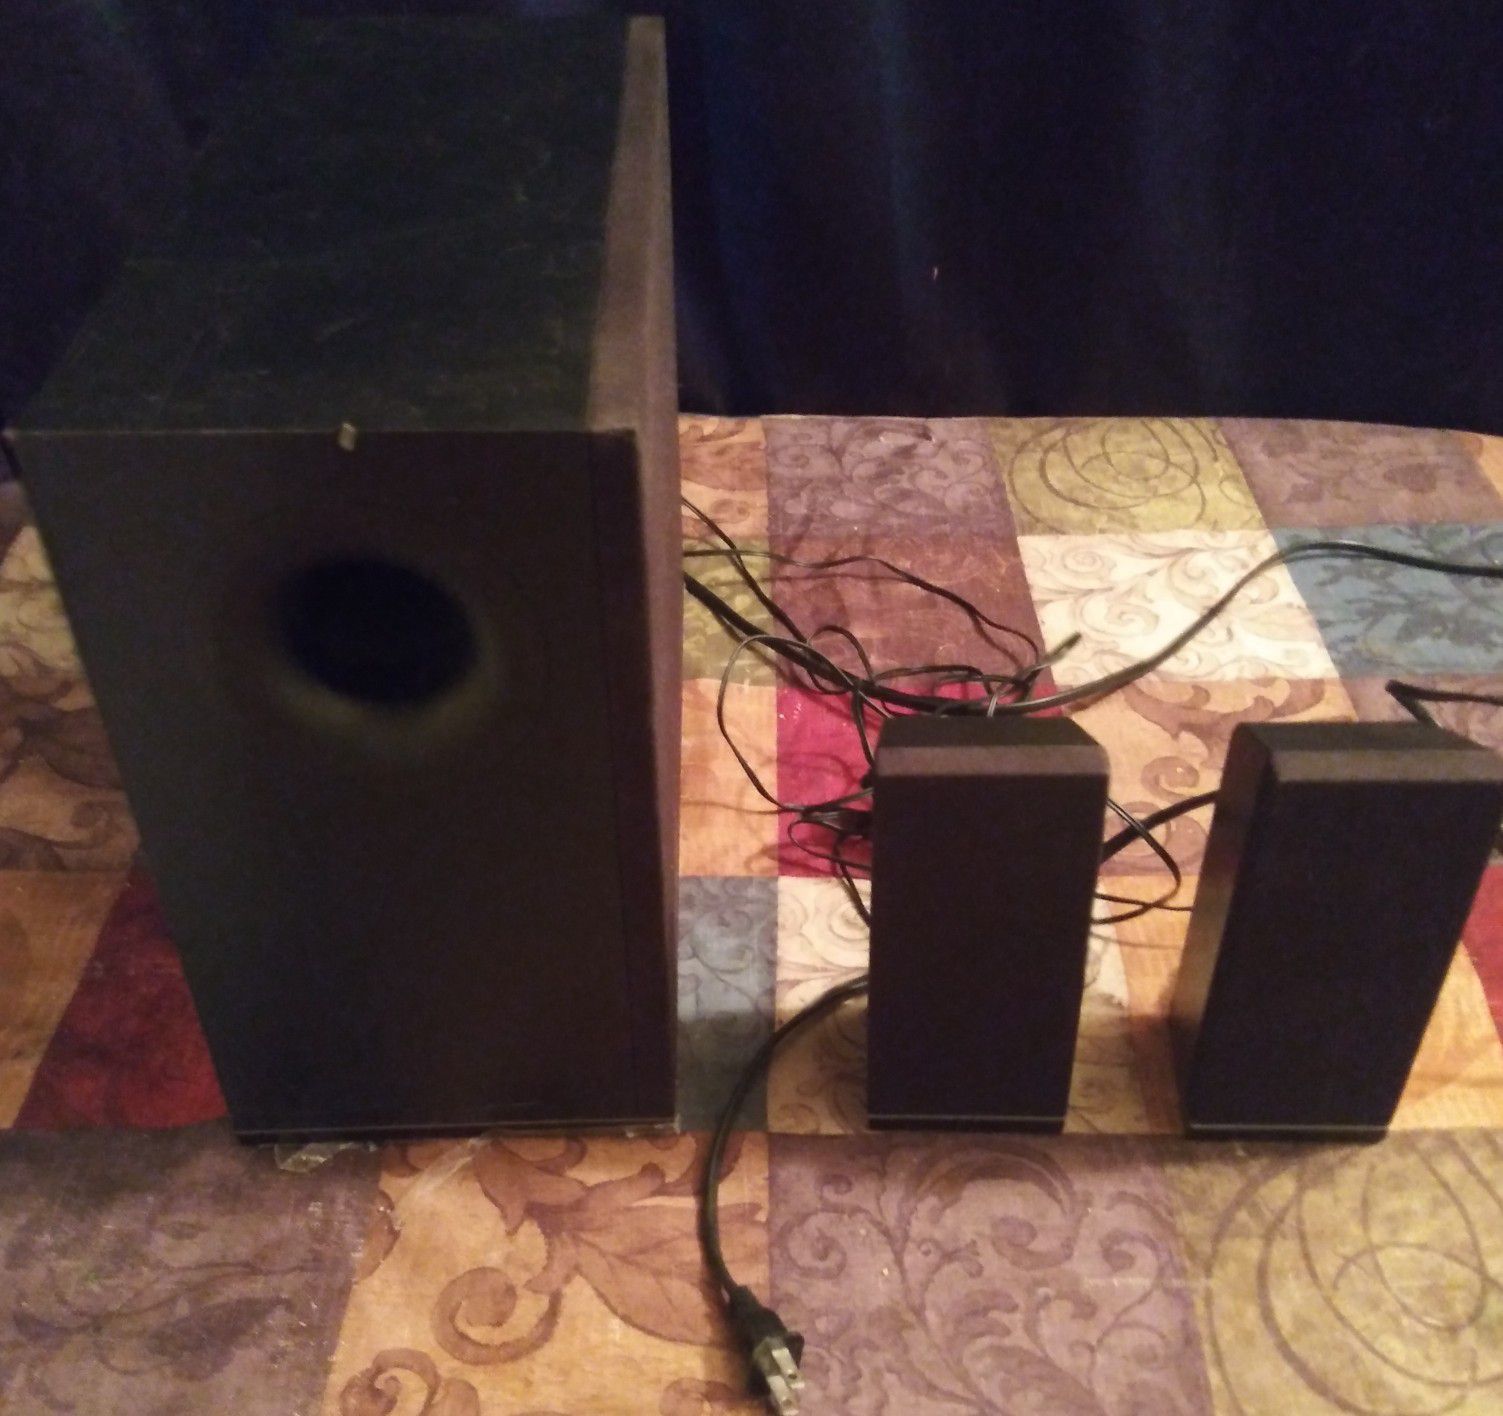 38" Vizo Bluetooth Subwoofer and Speakers